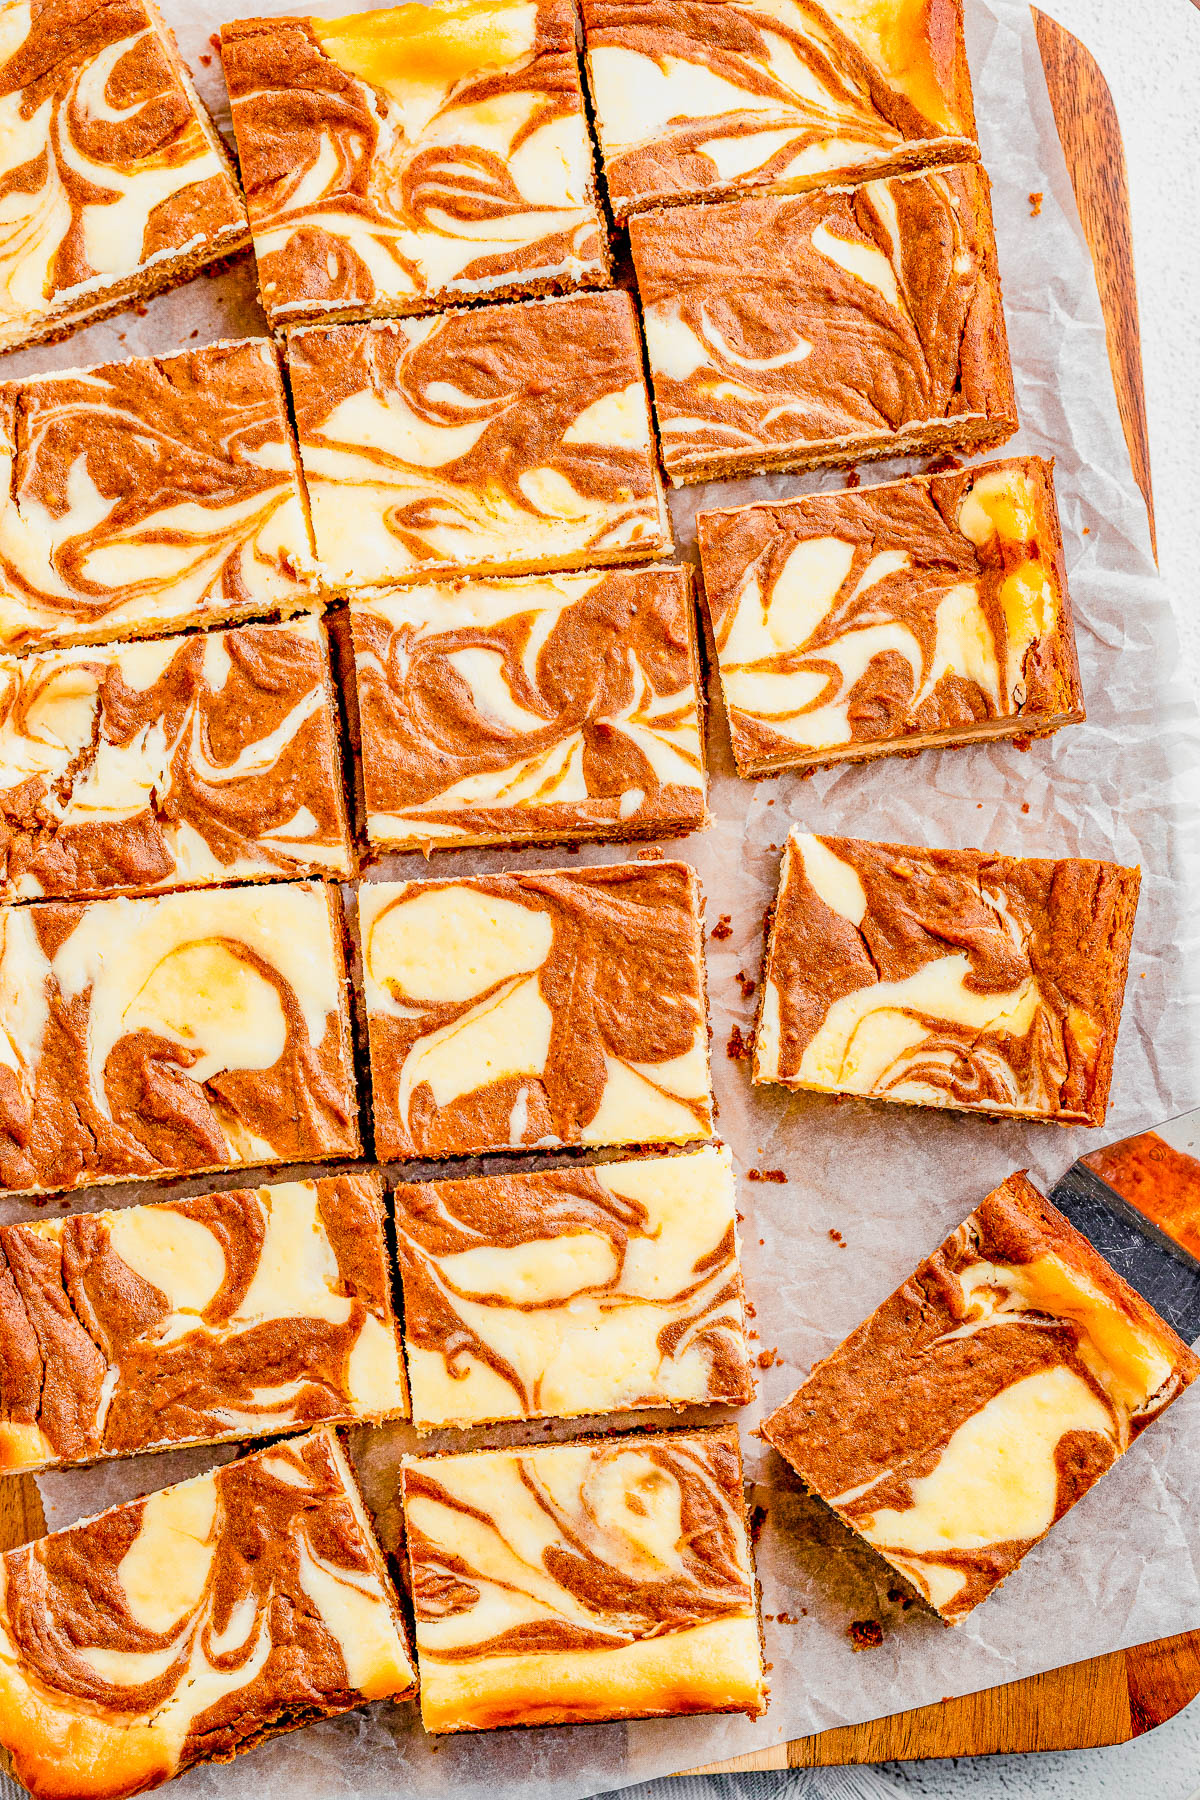 Pumpkin Cheesecake Bars — Classic cheesecake bars get an autumnal makeover in this recipe! A spiced pumpkin mixture is swirled into creamy cheesecake batter before being baked. Sweet, pumpkin spiced, CREAMY bars with a graham cracker crust for fabulous texture! PERFECT for fall gatherings or Thanksgiving! 